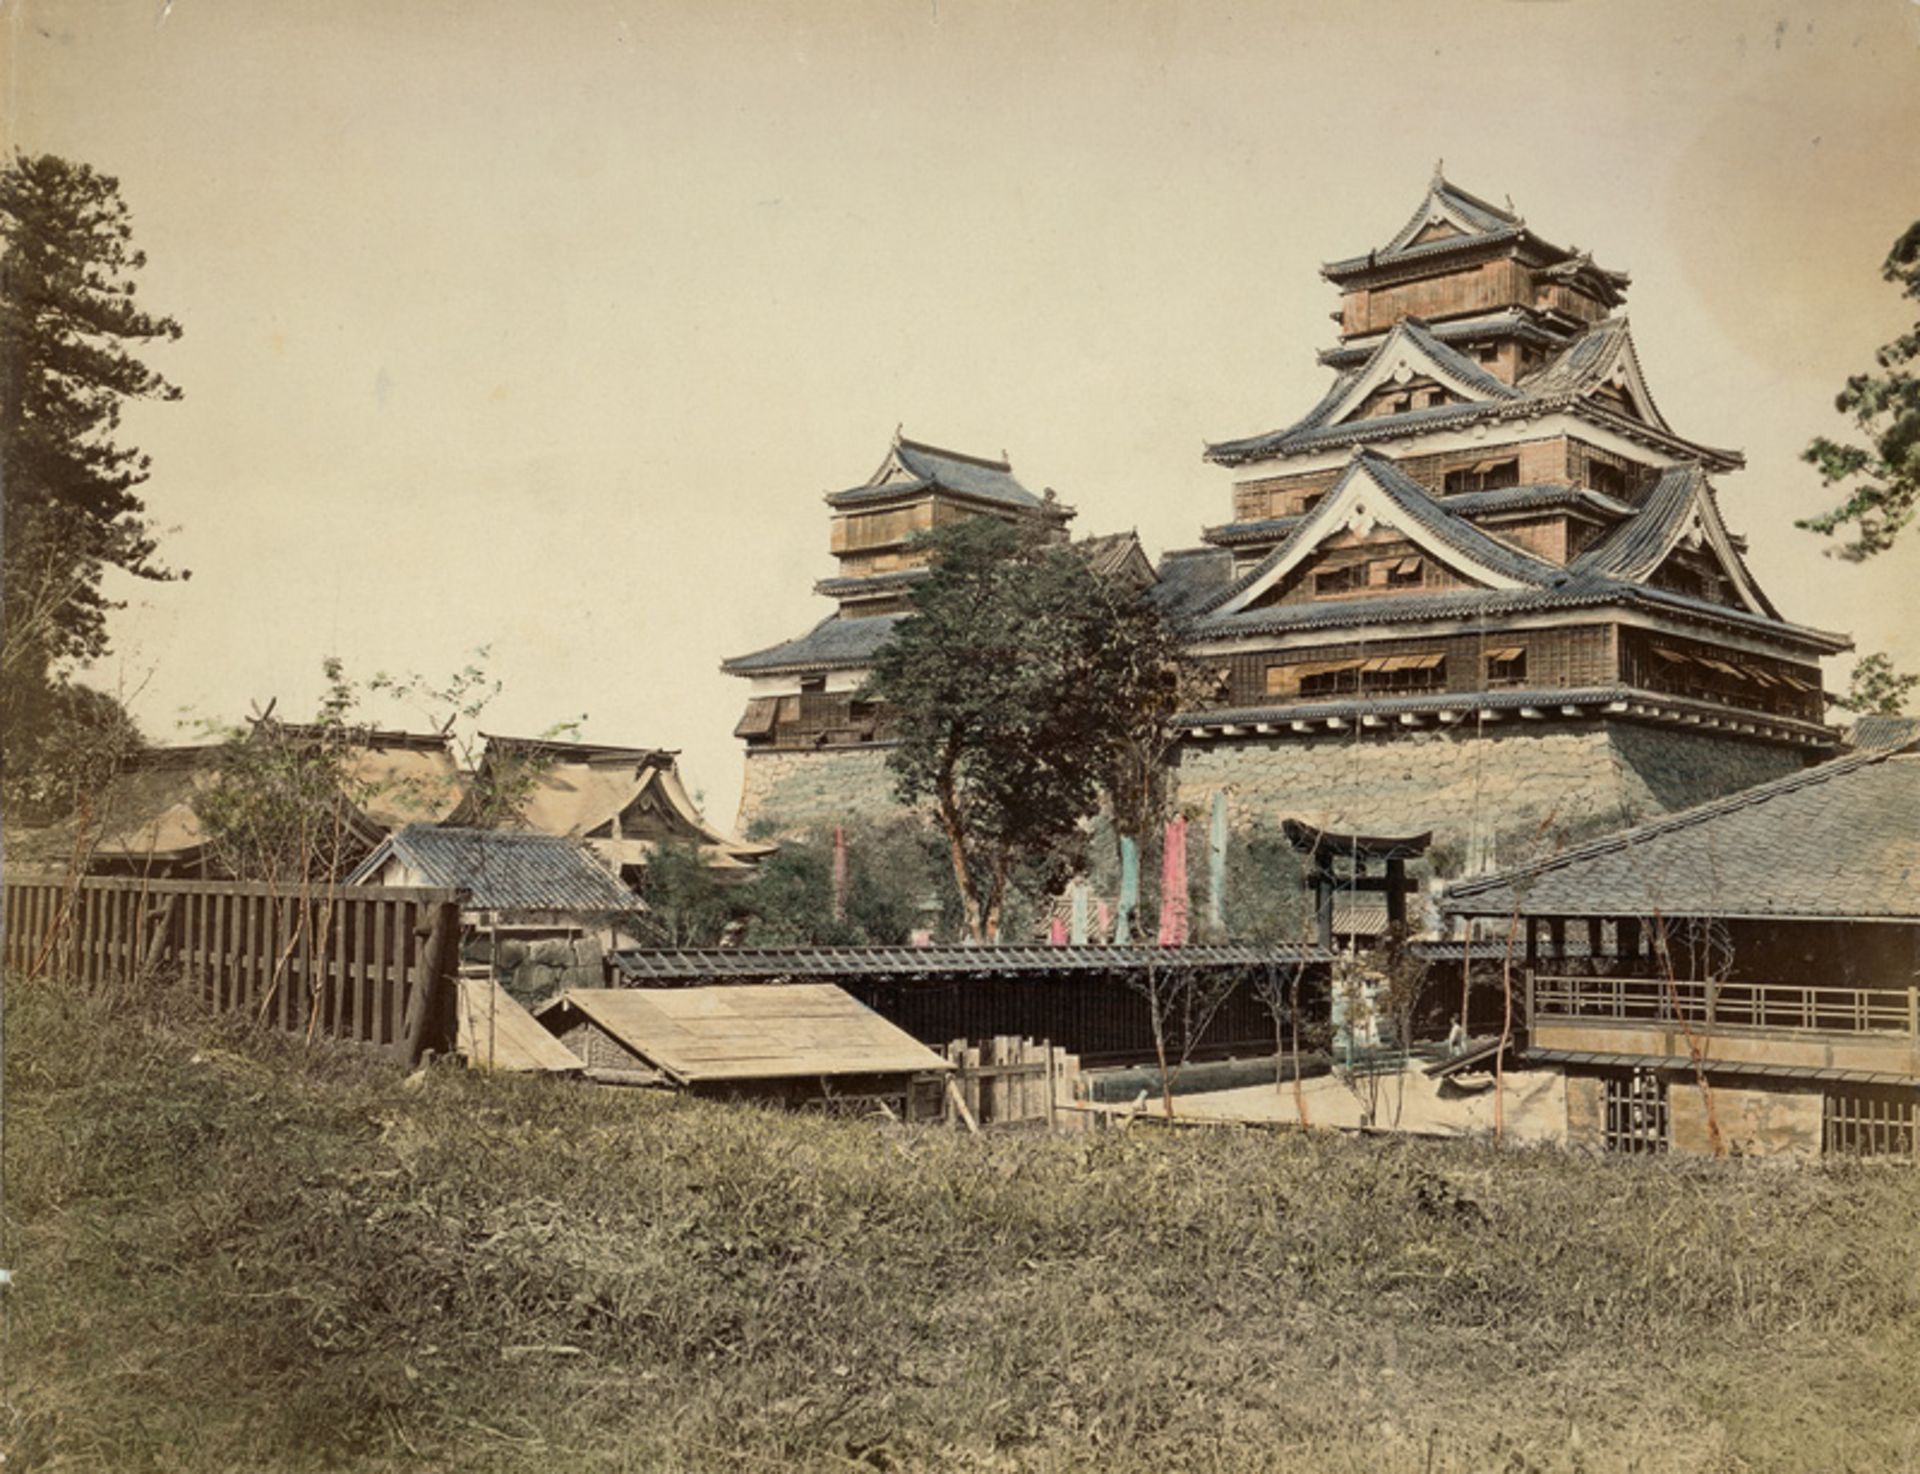 Japan: Landscapes, temples and portraits of people of Japan